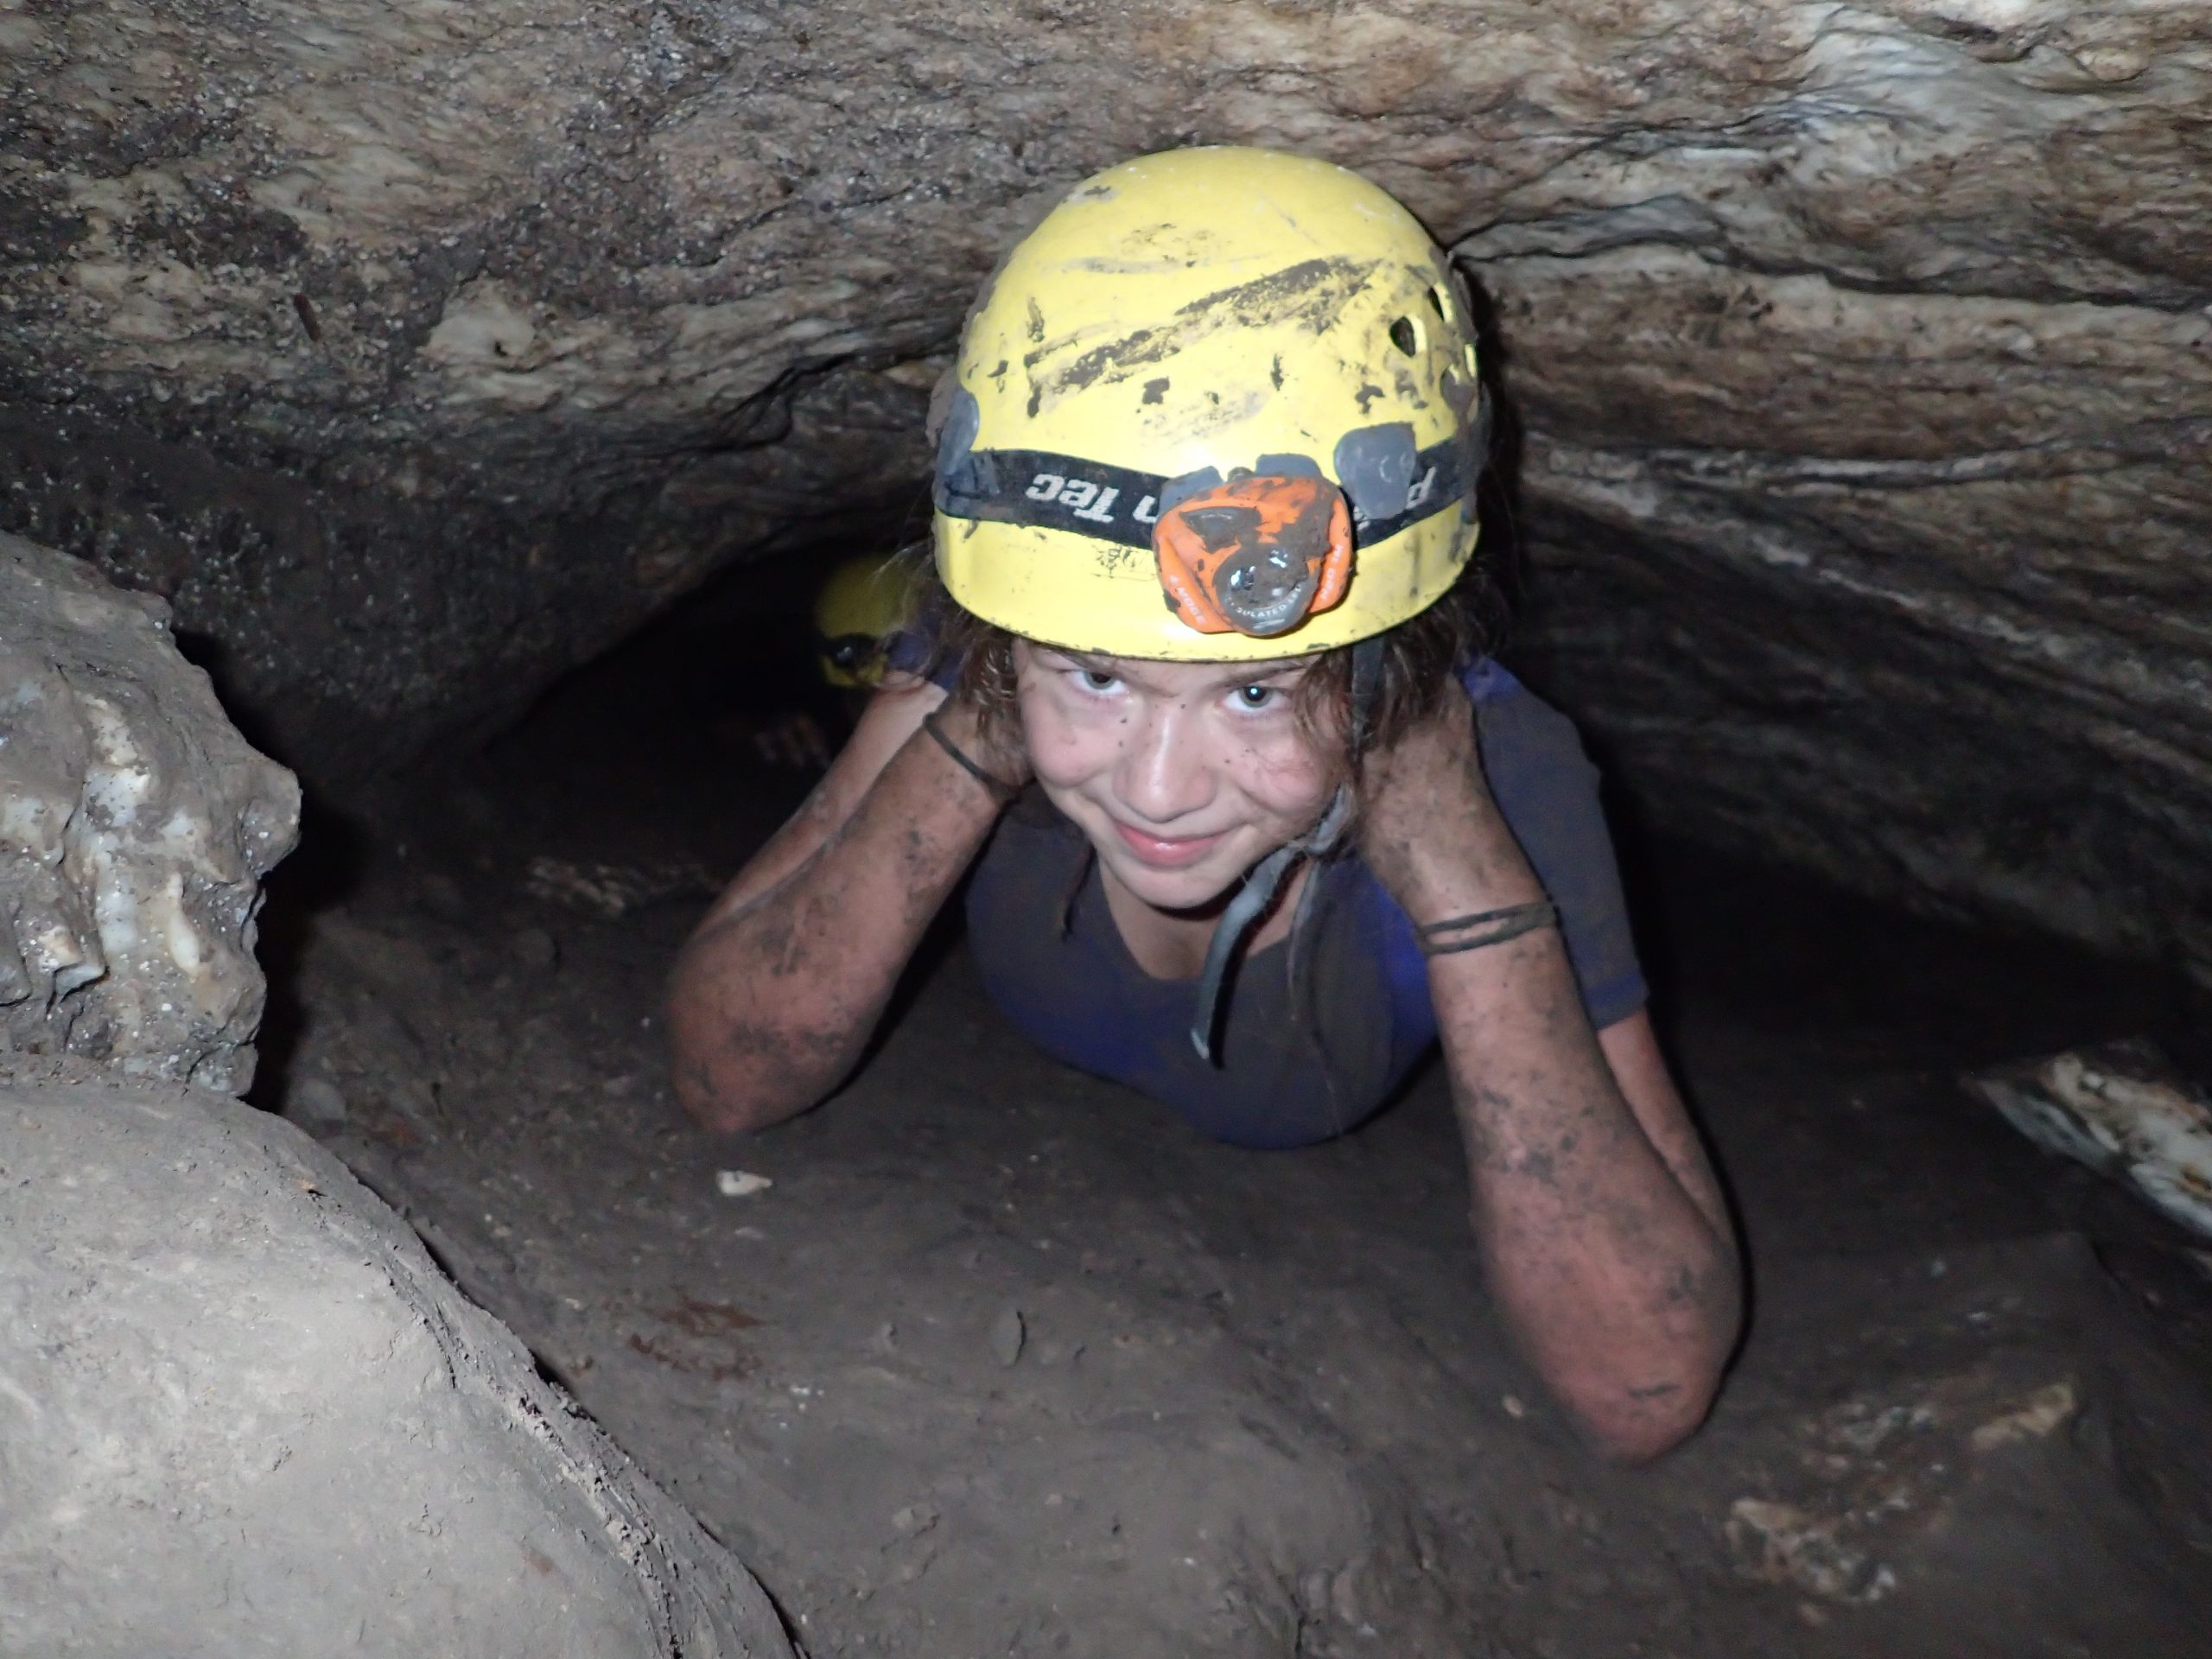 Kid in a cave covered in mud wearing a yellow helmet with a headlamp